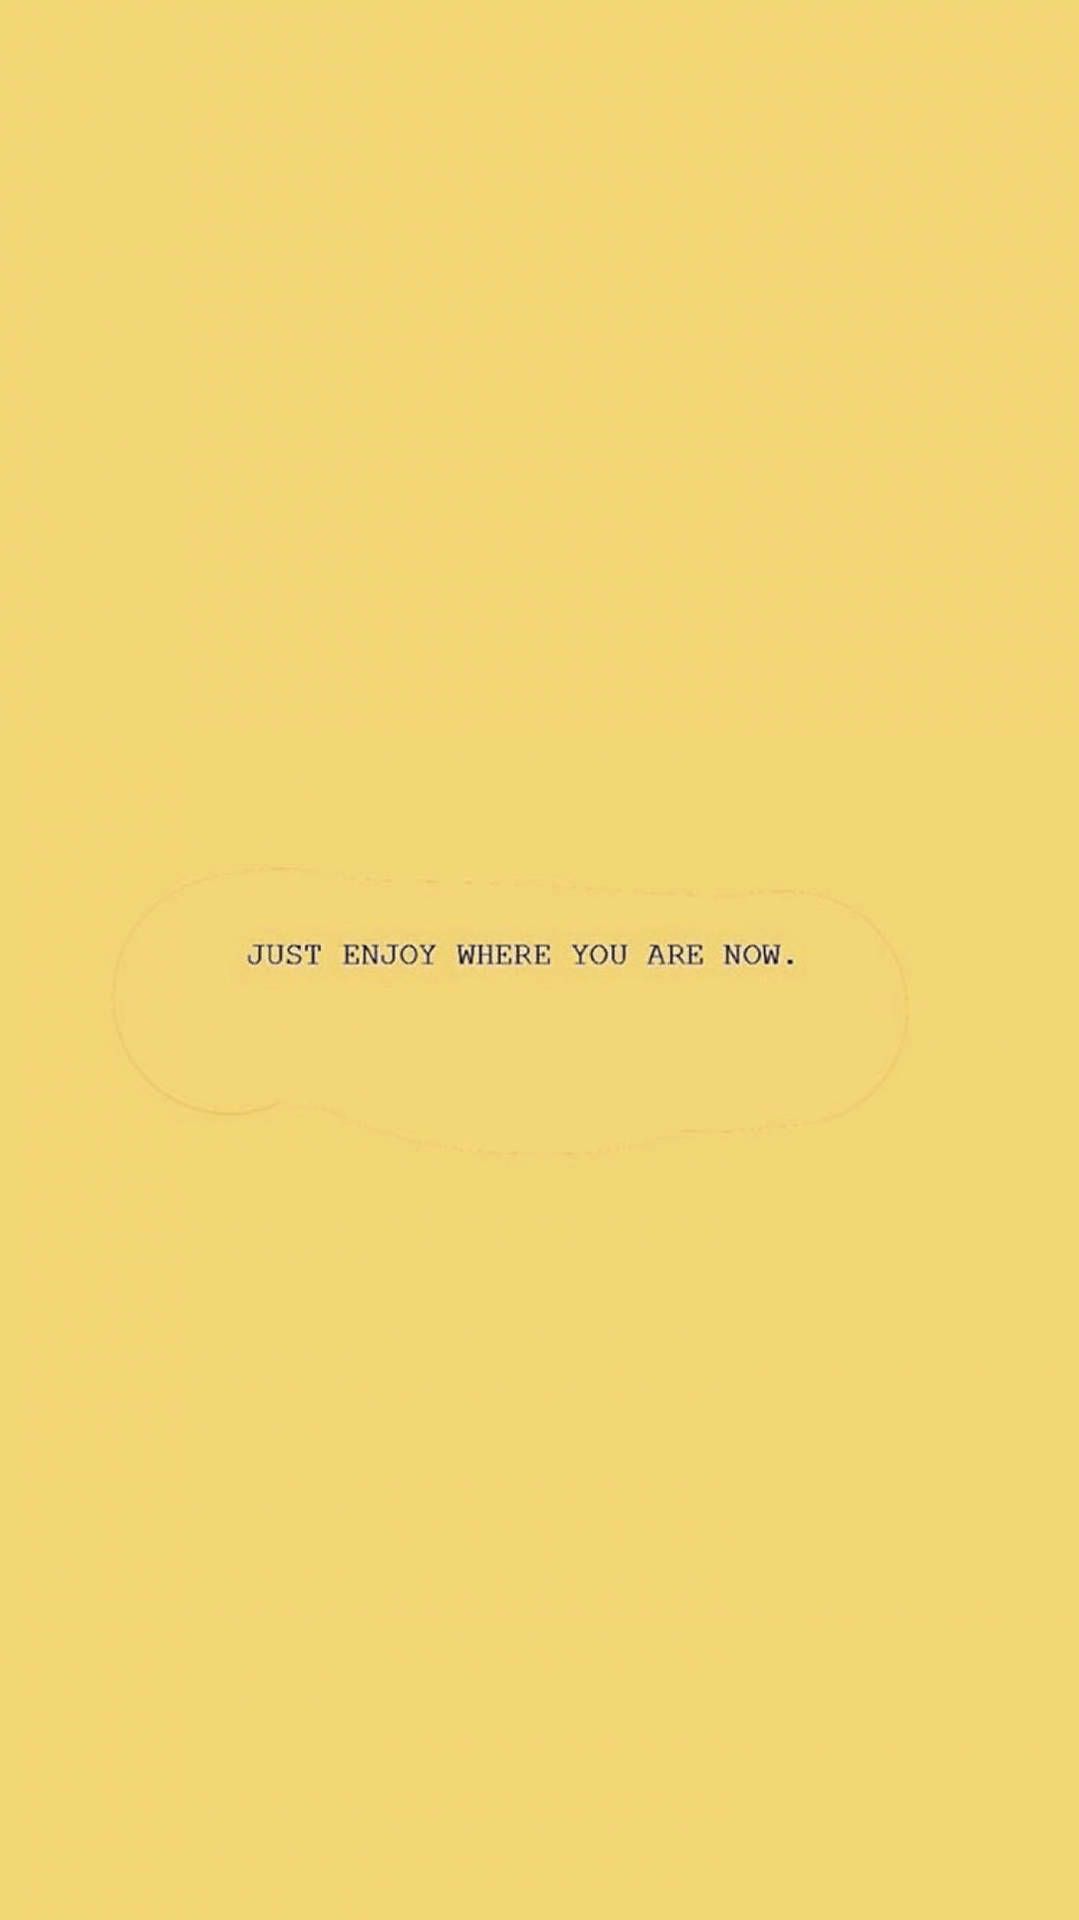 Just enjoy where you are now. - Sad quotes